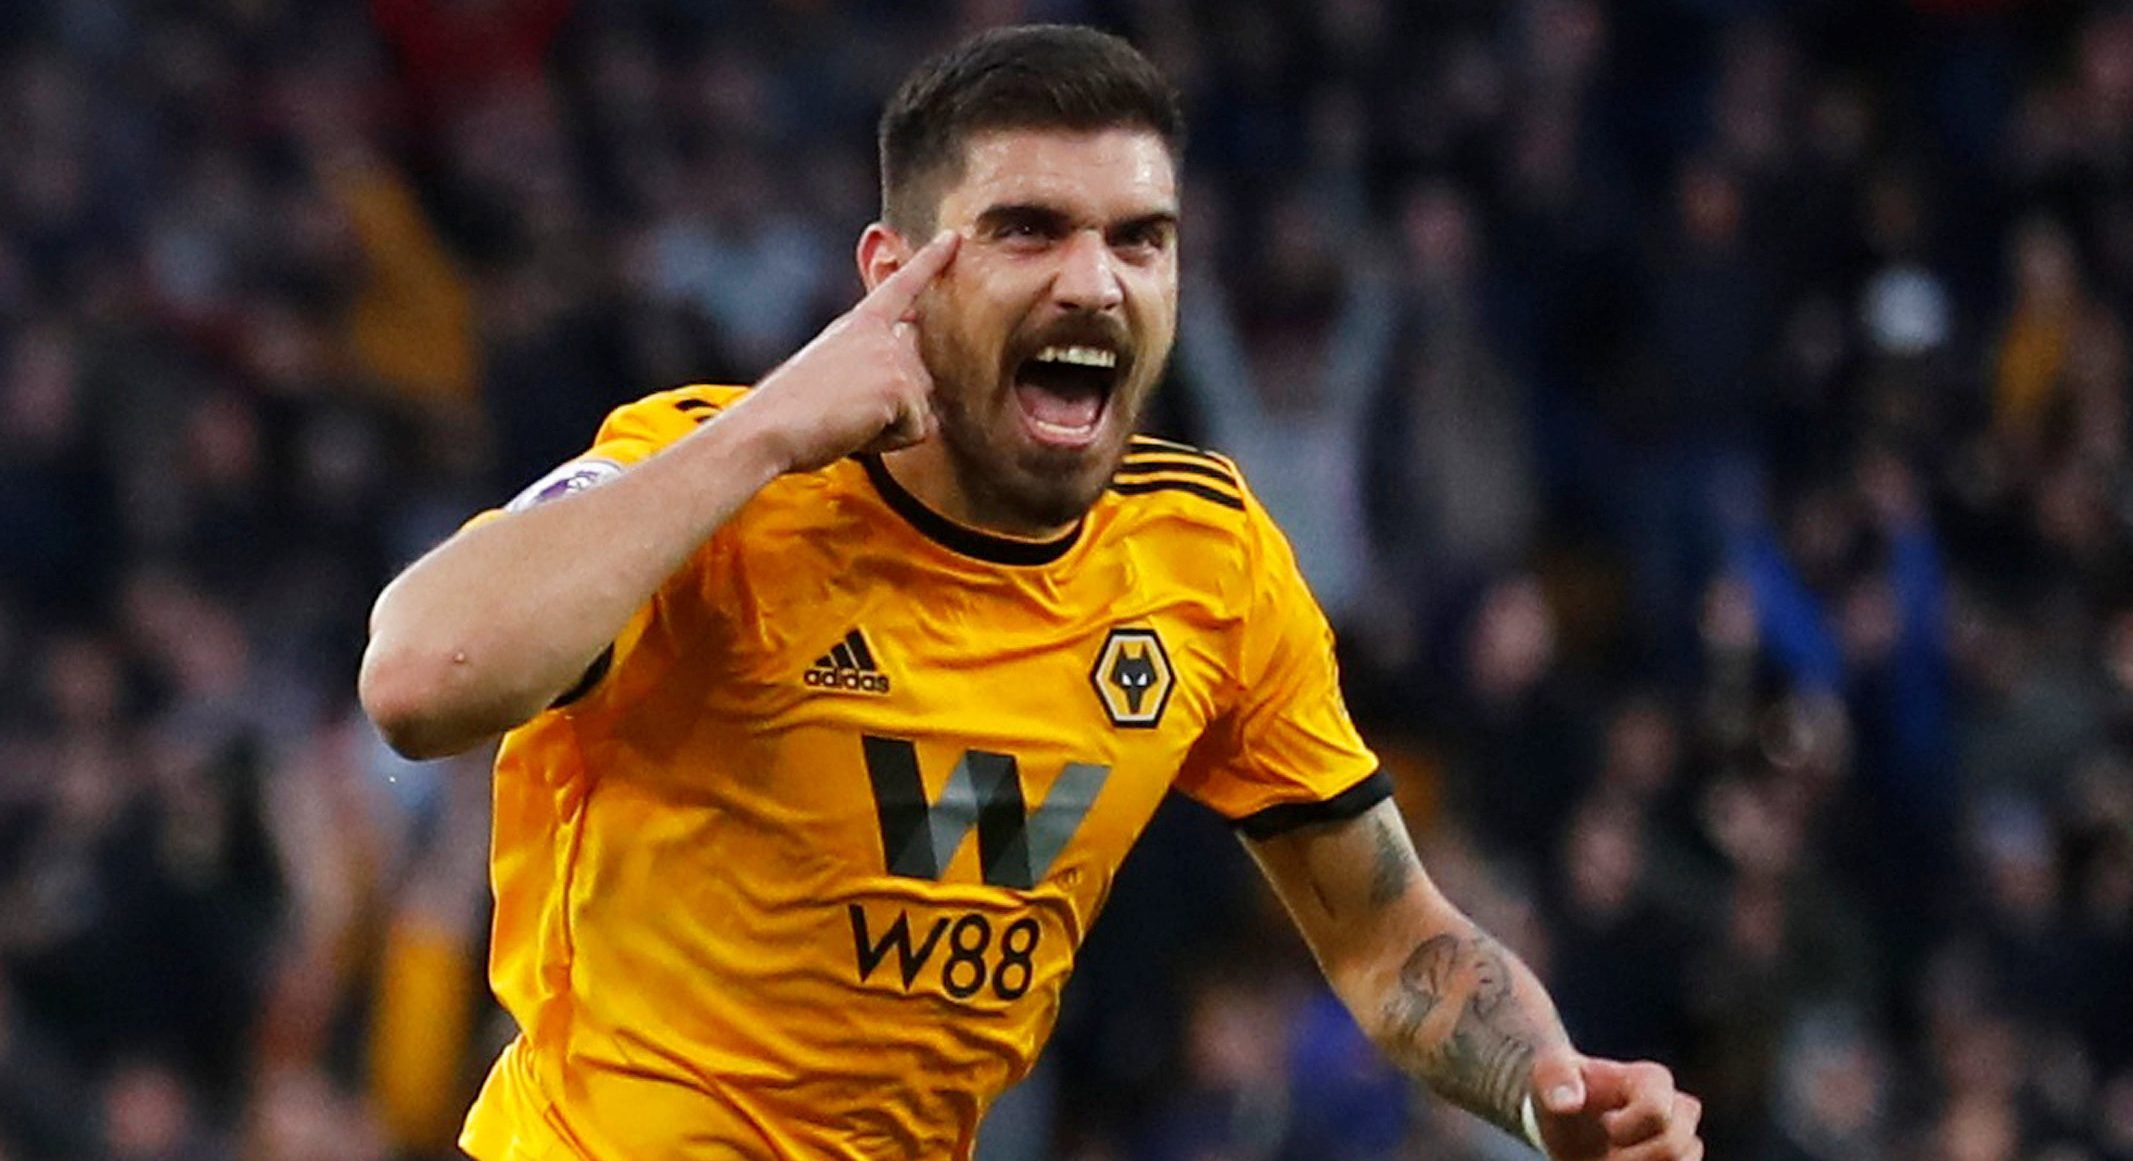 Soccer Football - Wolverhampton Wanderers v Arsenal - Molineux Stadium, Wolverhampton, Britain - April 24, 2019  Wolverhampton Wanderers' Ruben Neves celebrates scoring their first goal   REUTERS/Eddie Keogh  EDITORIAL USE ONLY. No use with unauthorized audio, video, data, fixture lists, club/league logos or 